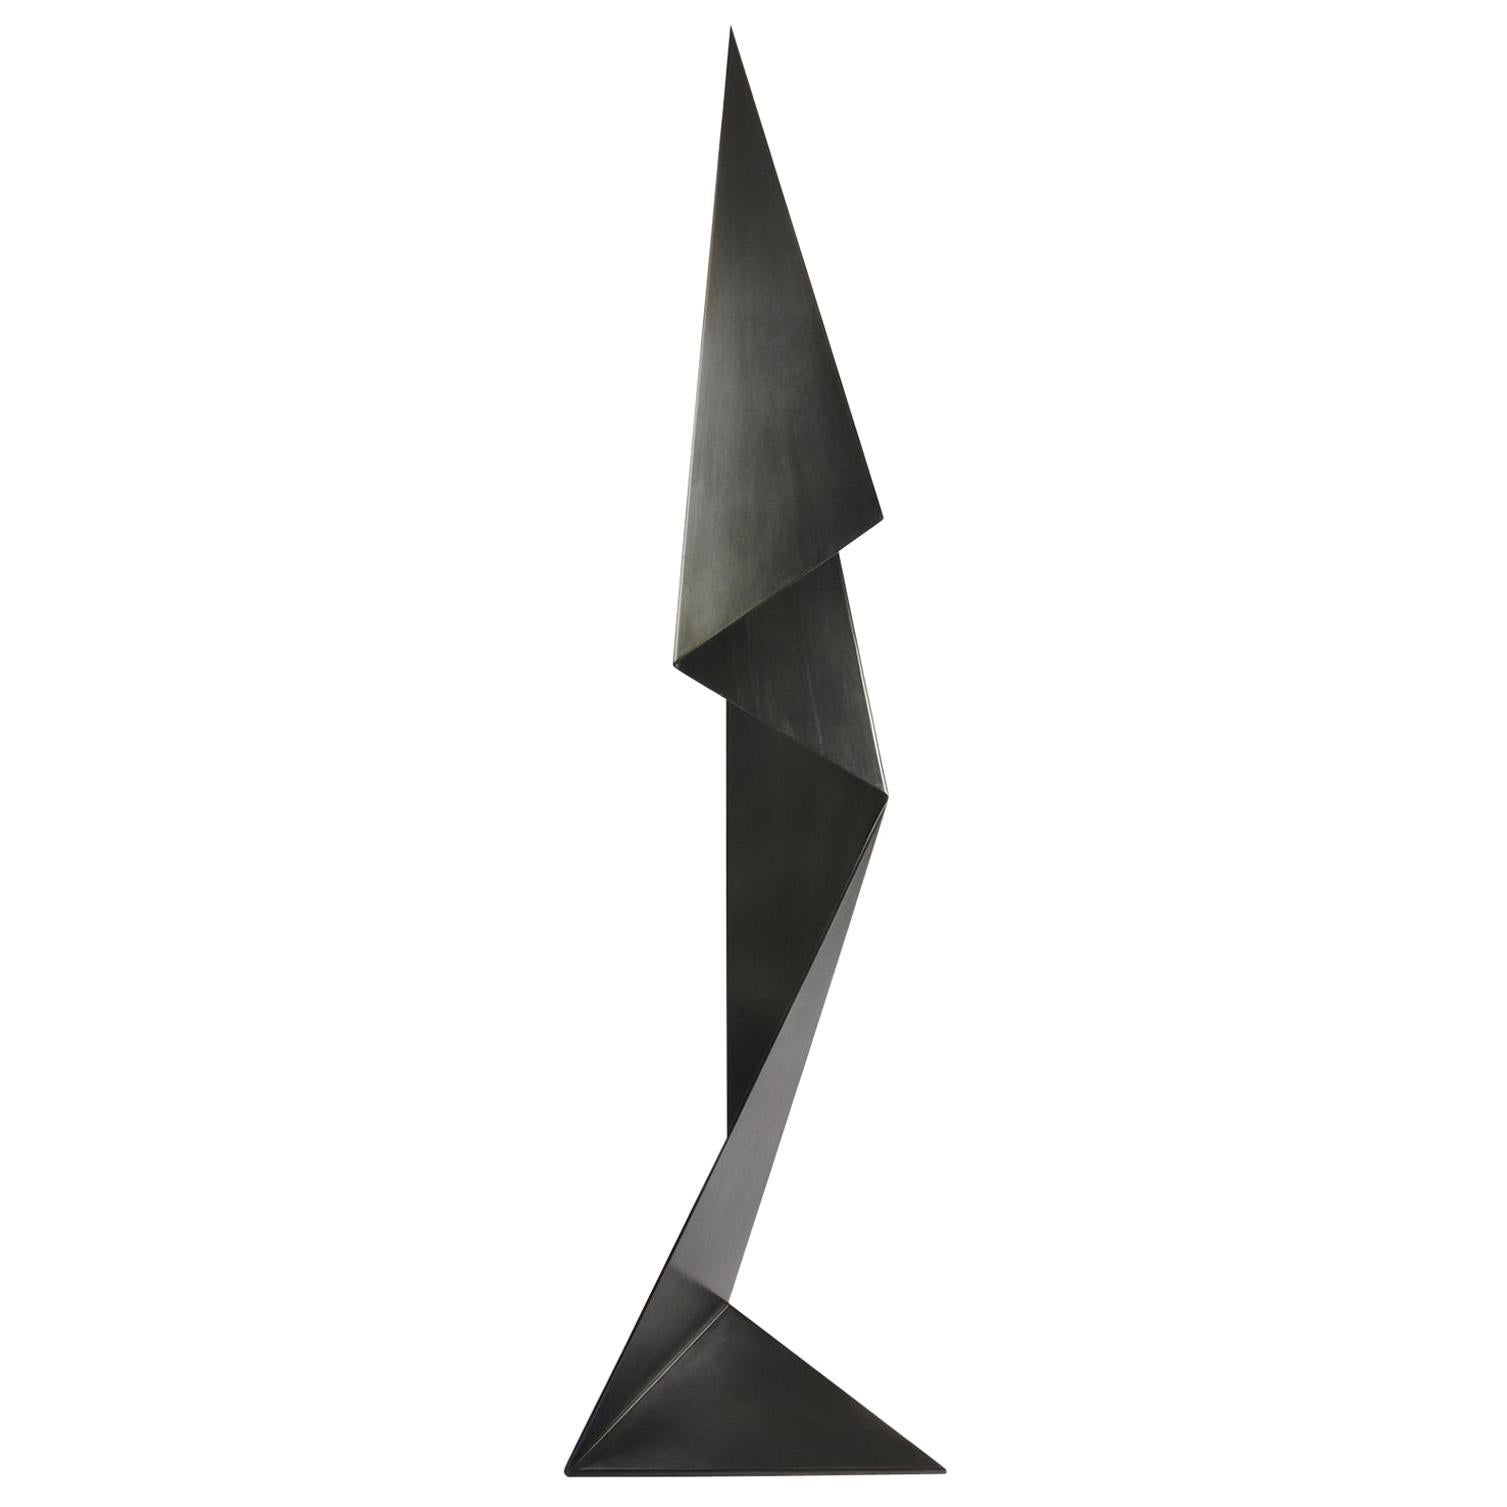 Tall Abstract Origami Art Metal Sculpture Figure in a Hand Blackened Finish For Sale